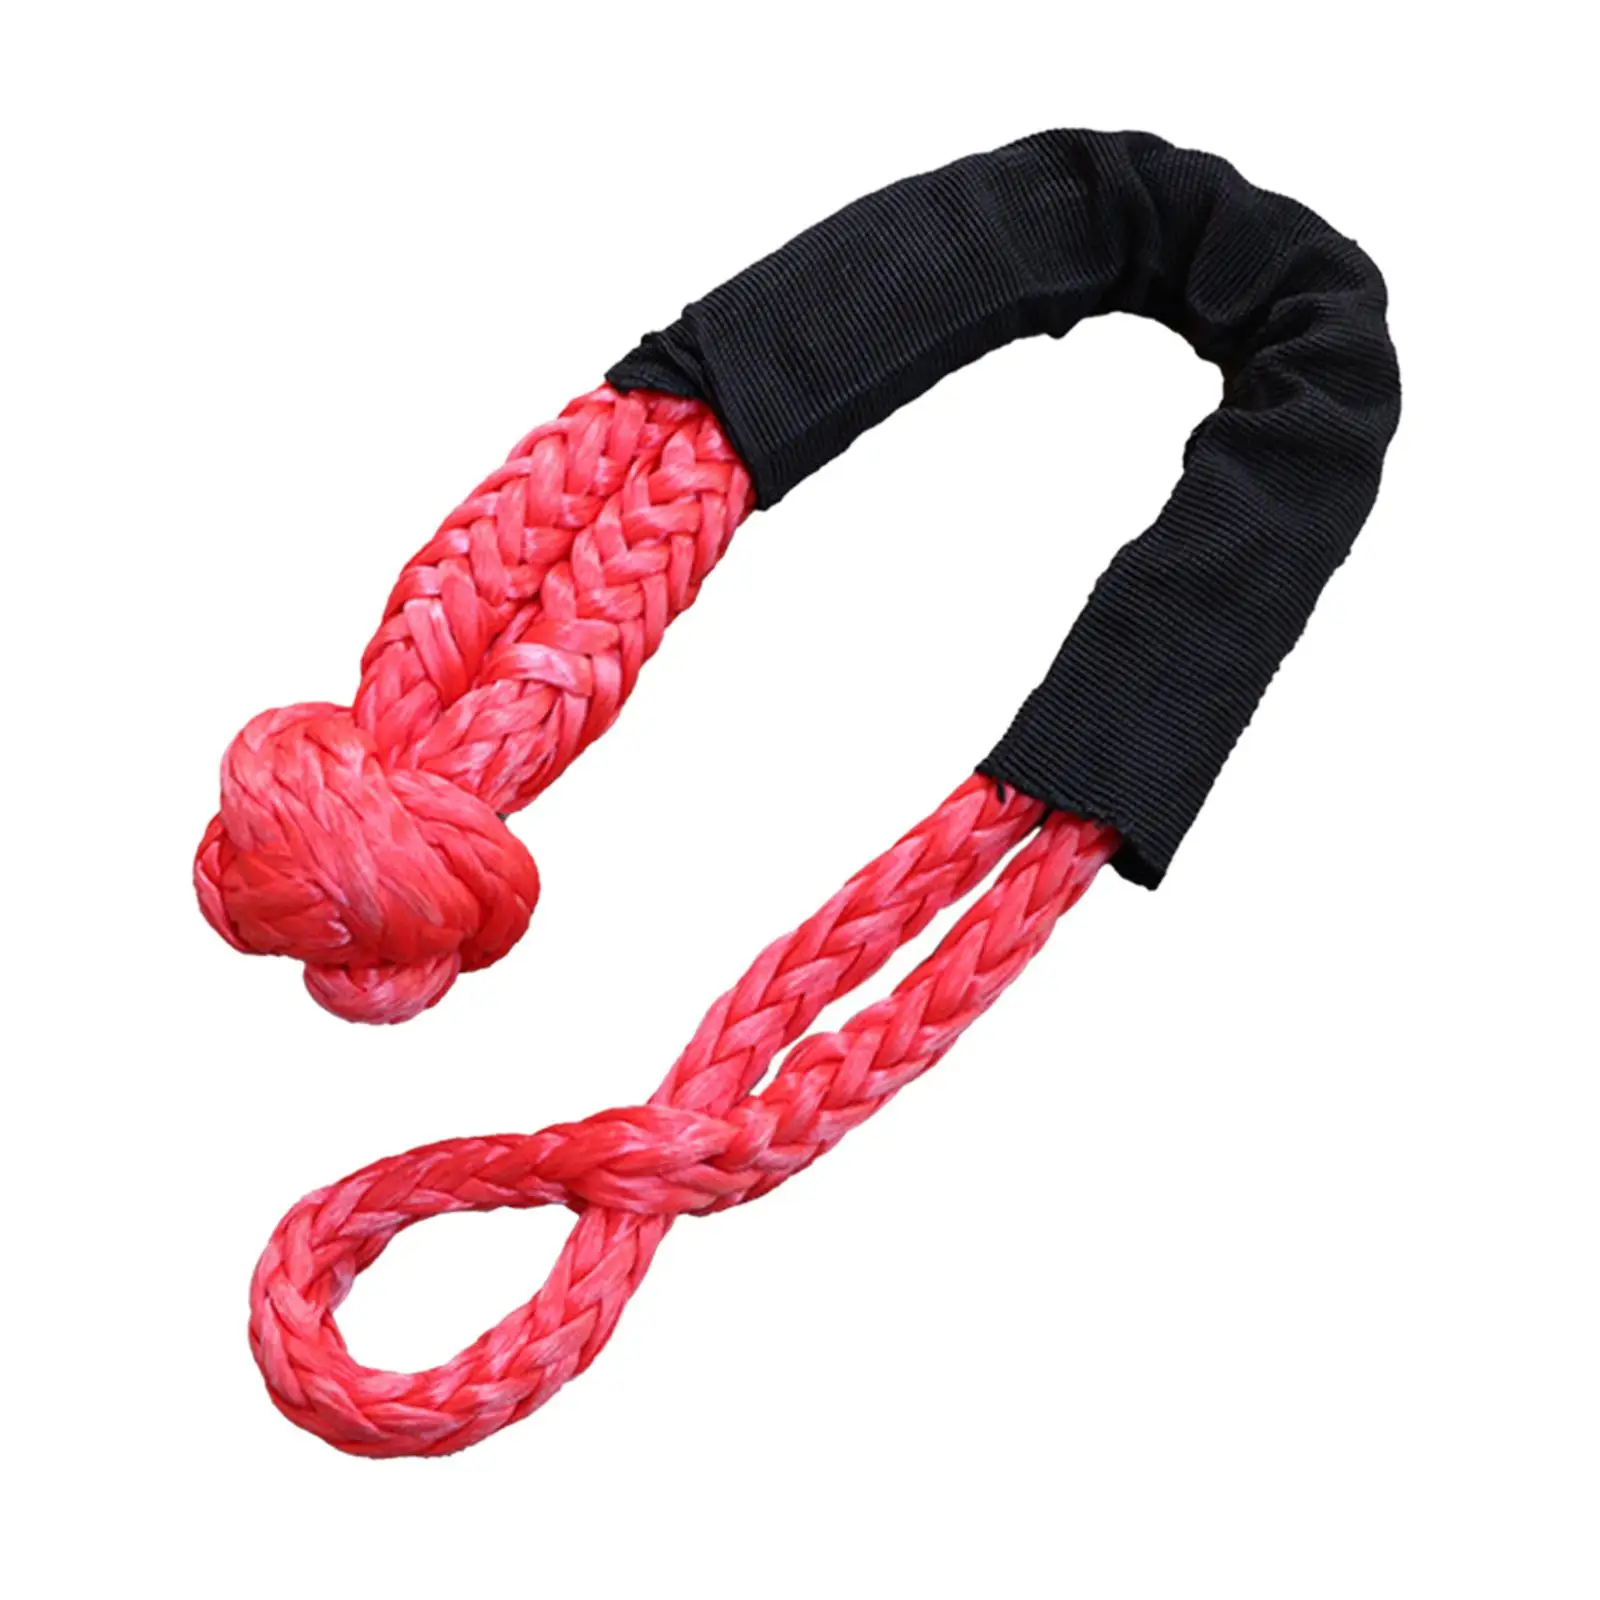 Soft Shackle Versatile Auto Accessories Car Breakdowns Strong High Strength Oxford Cloth Fiber Tow Rope for Sailing Trucks